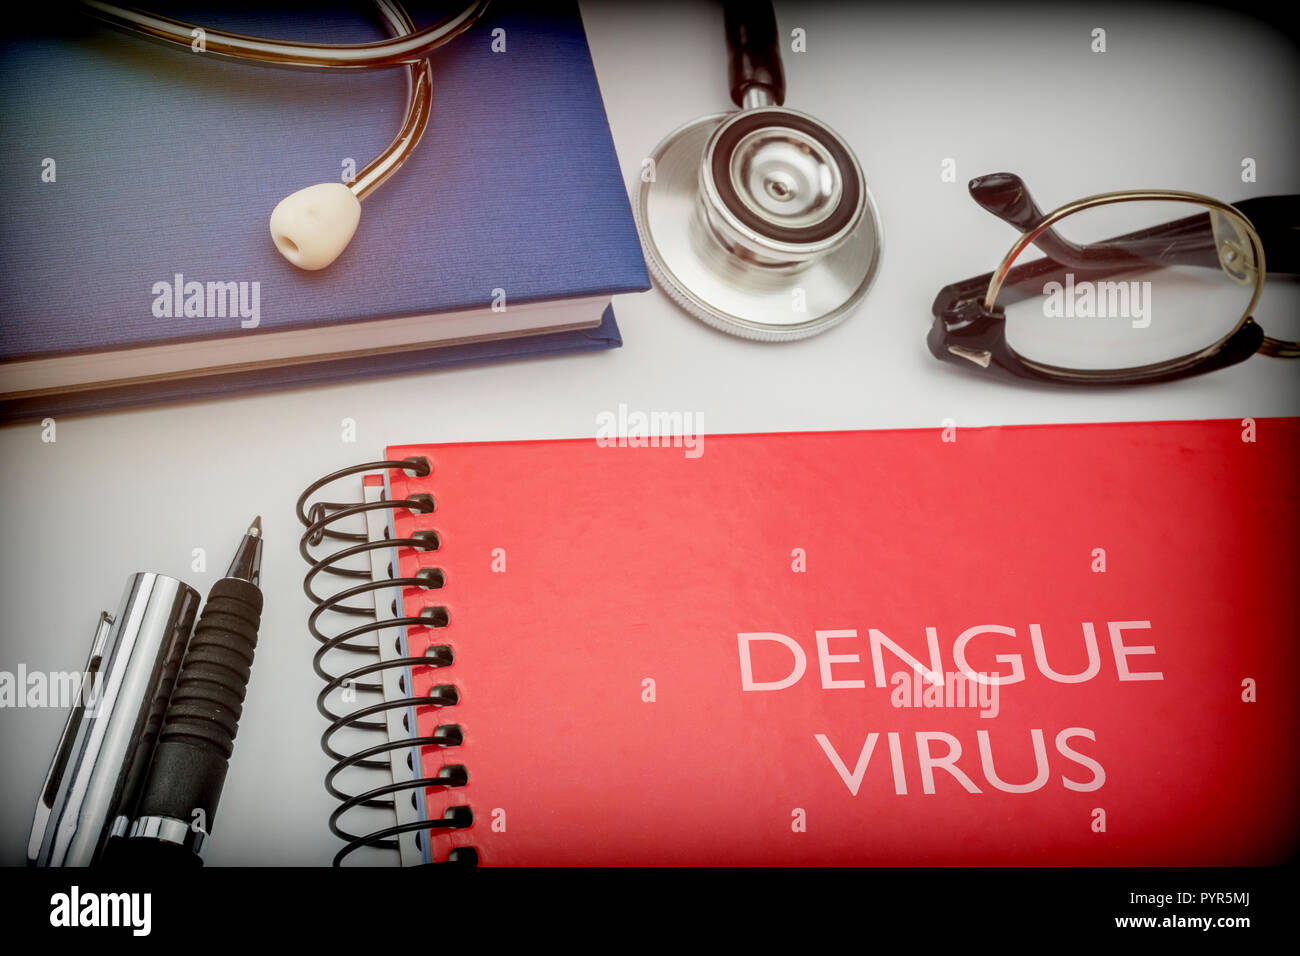 Titled red book dengue virus along with medical equipment, conceptual image Stock Photo